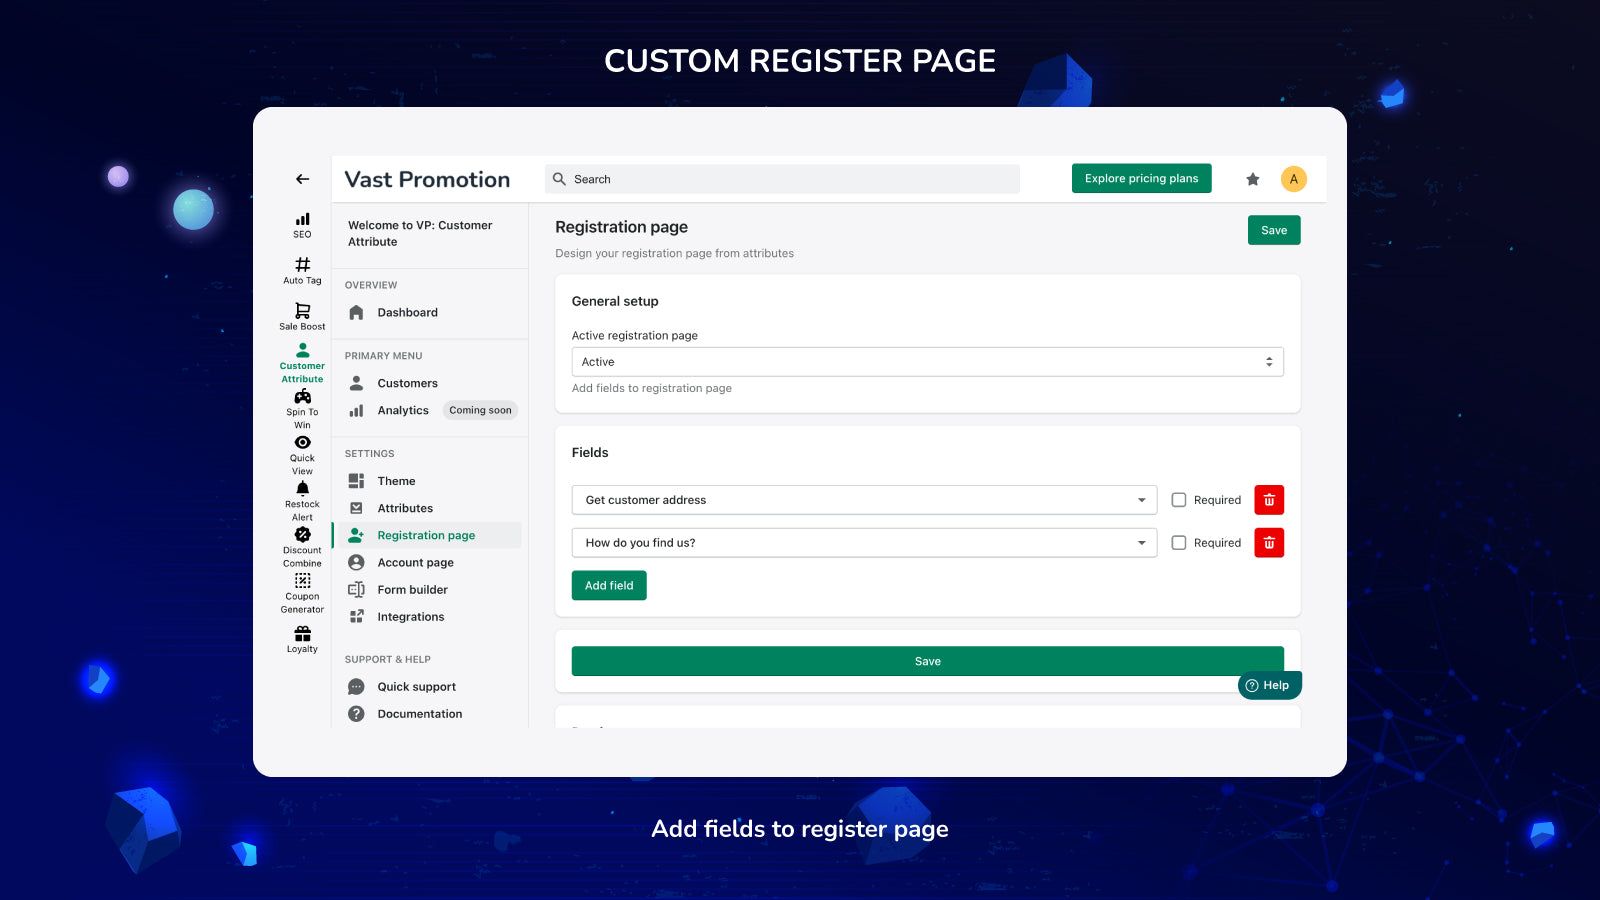 Add fields to register page